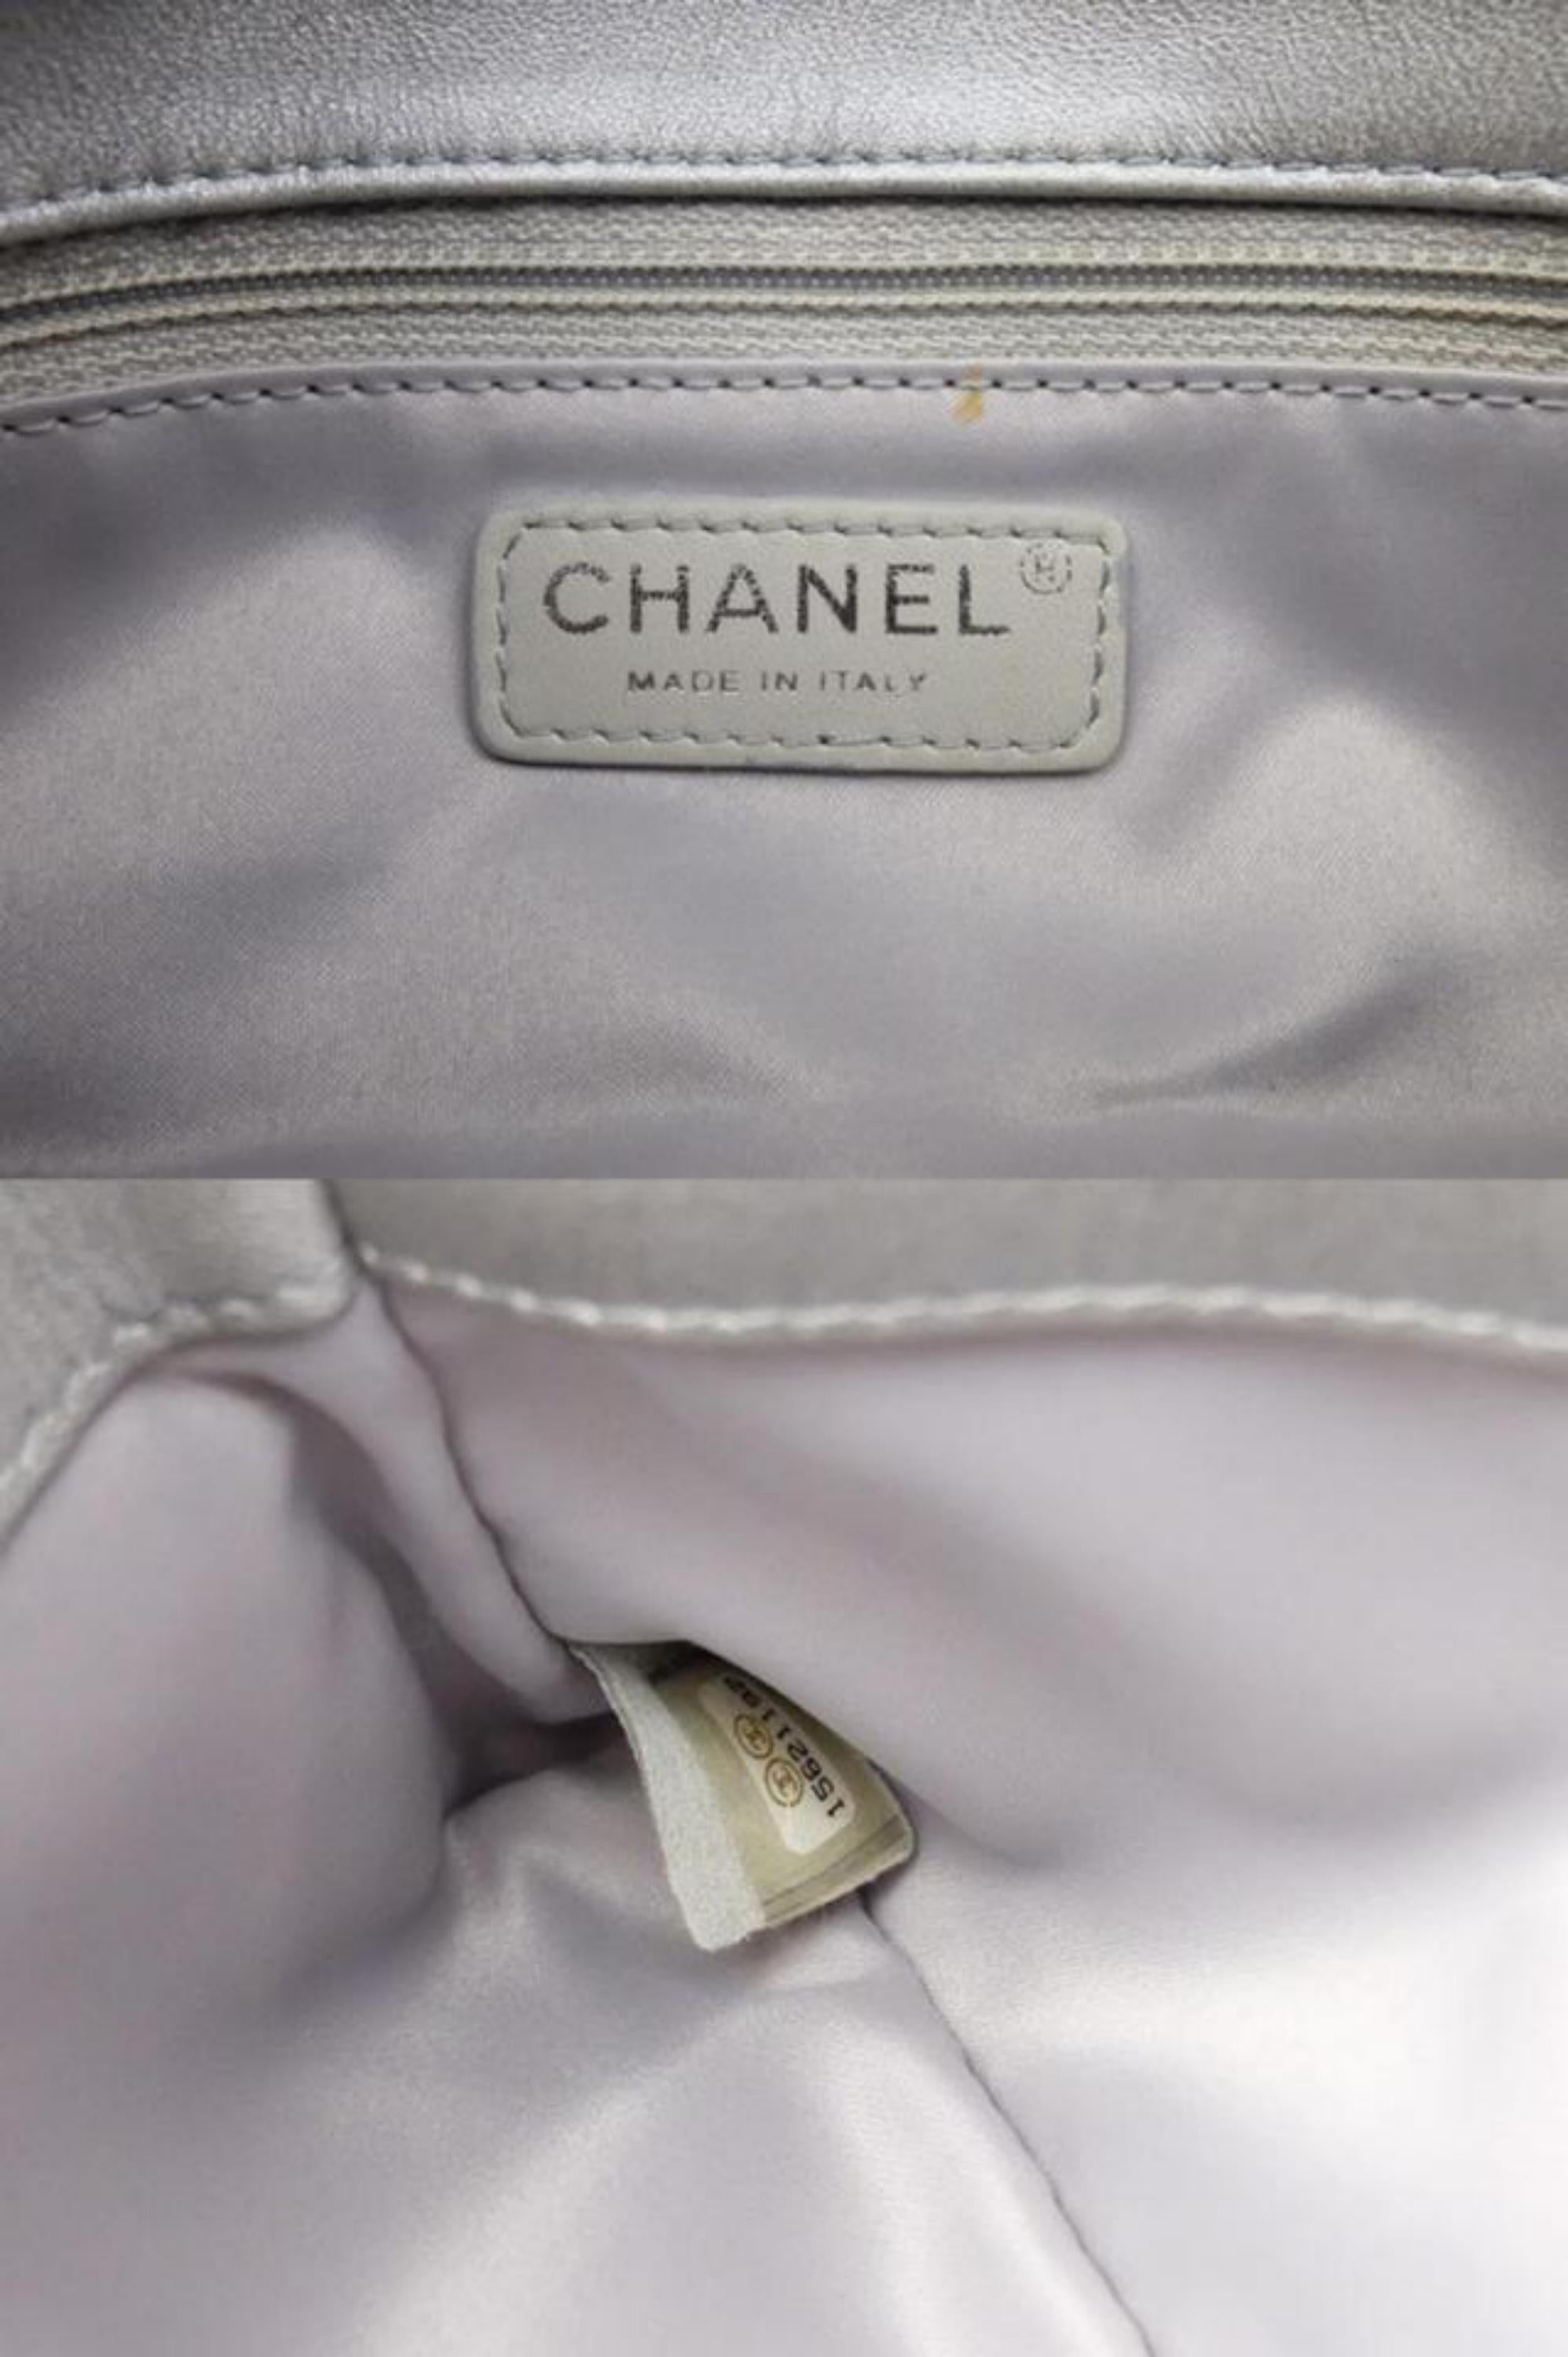 Chanel Classic Flap 226268 Silver Sequins Shoulder Bag In Good Condition For Sale In Forest Hills, NY